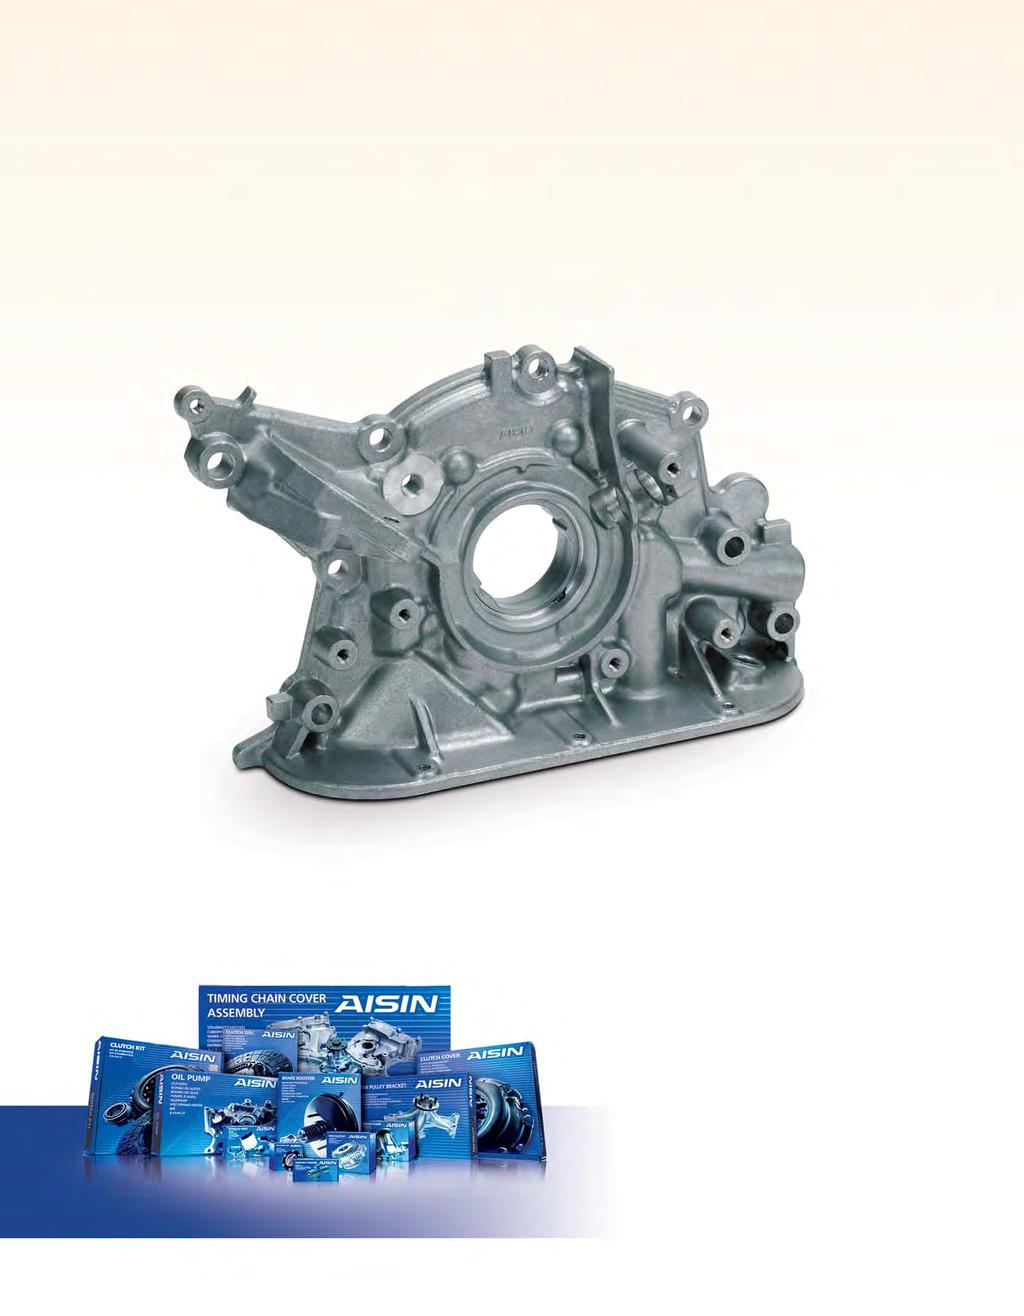 Oil Pump Engineered to exacting OE specifications, AISIN Oil Pumps deliver ideal oil pressure to the engine without creating excess load.